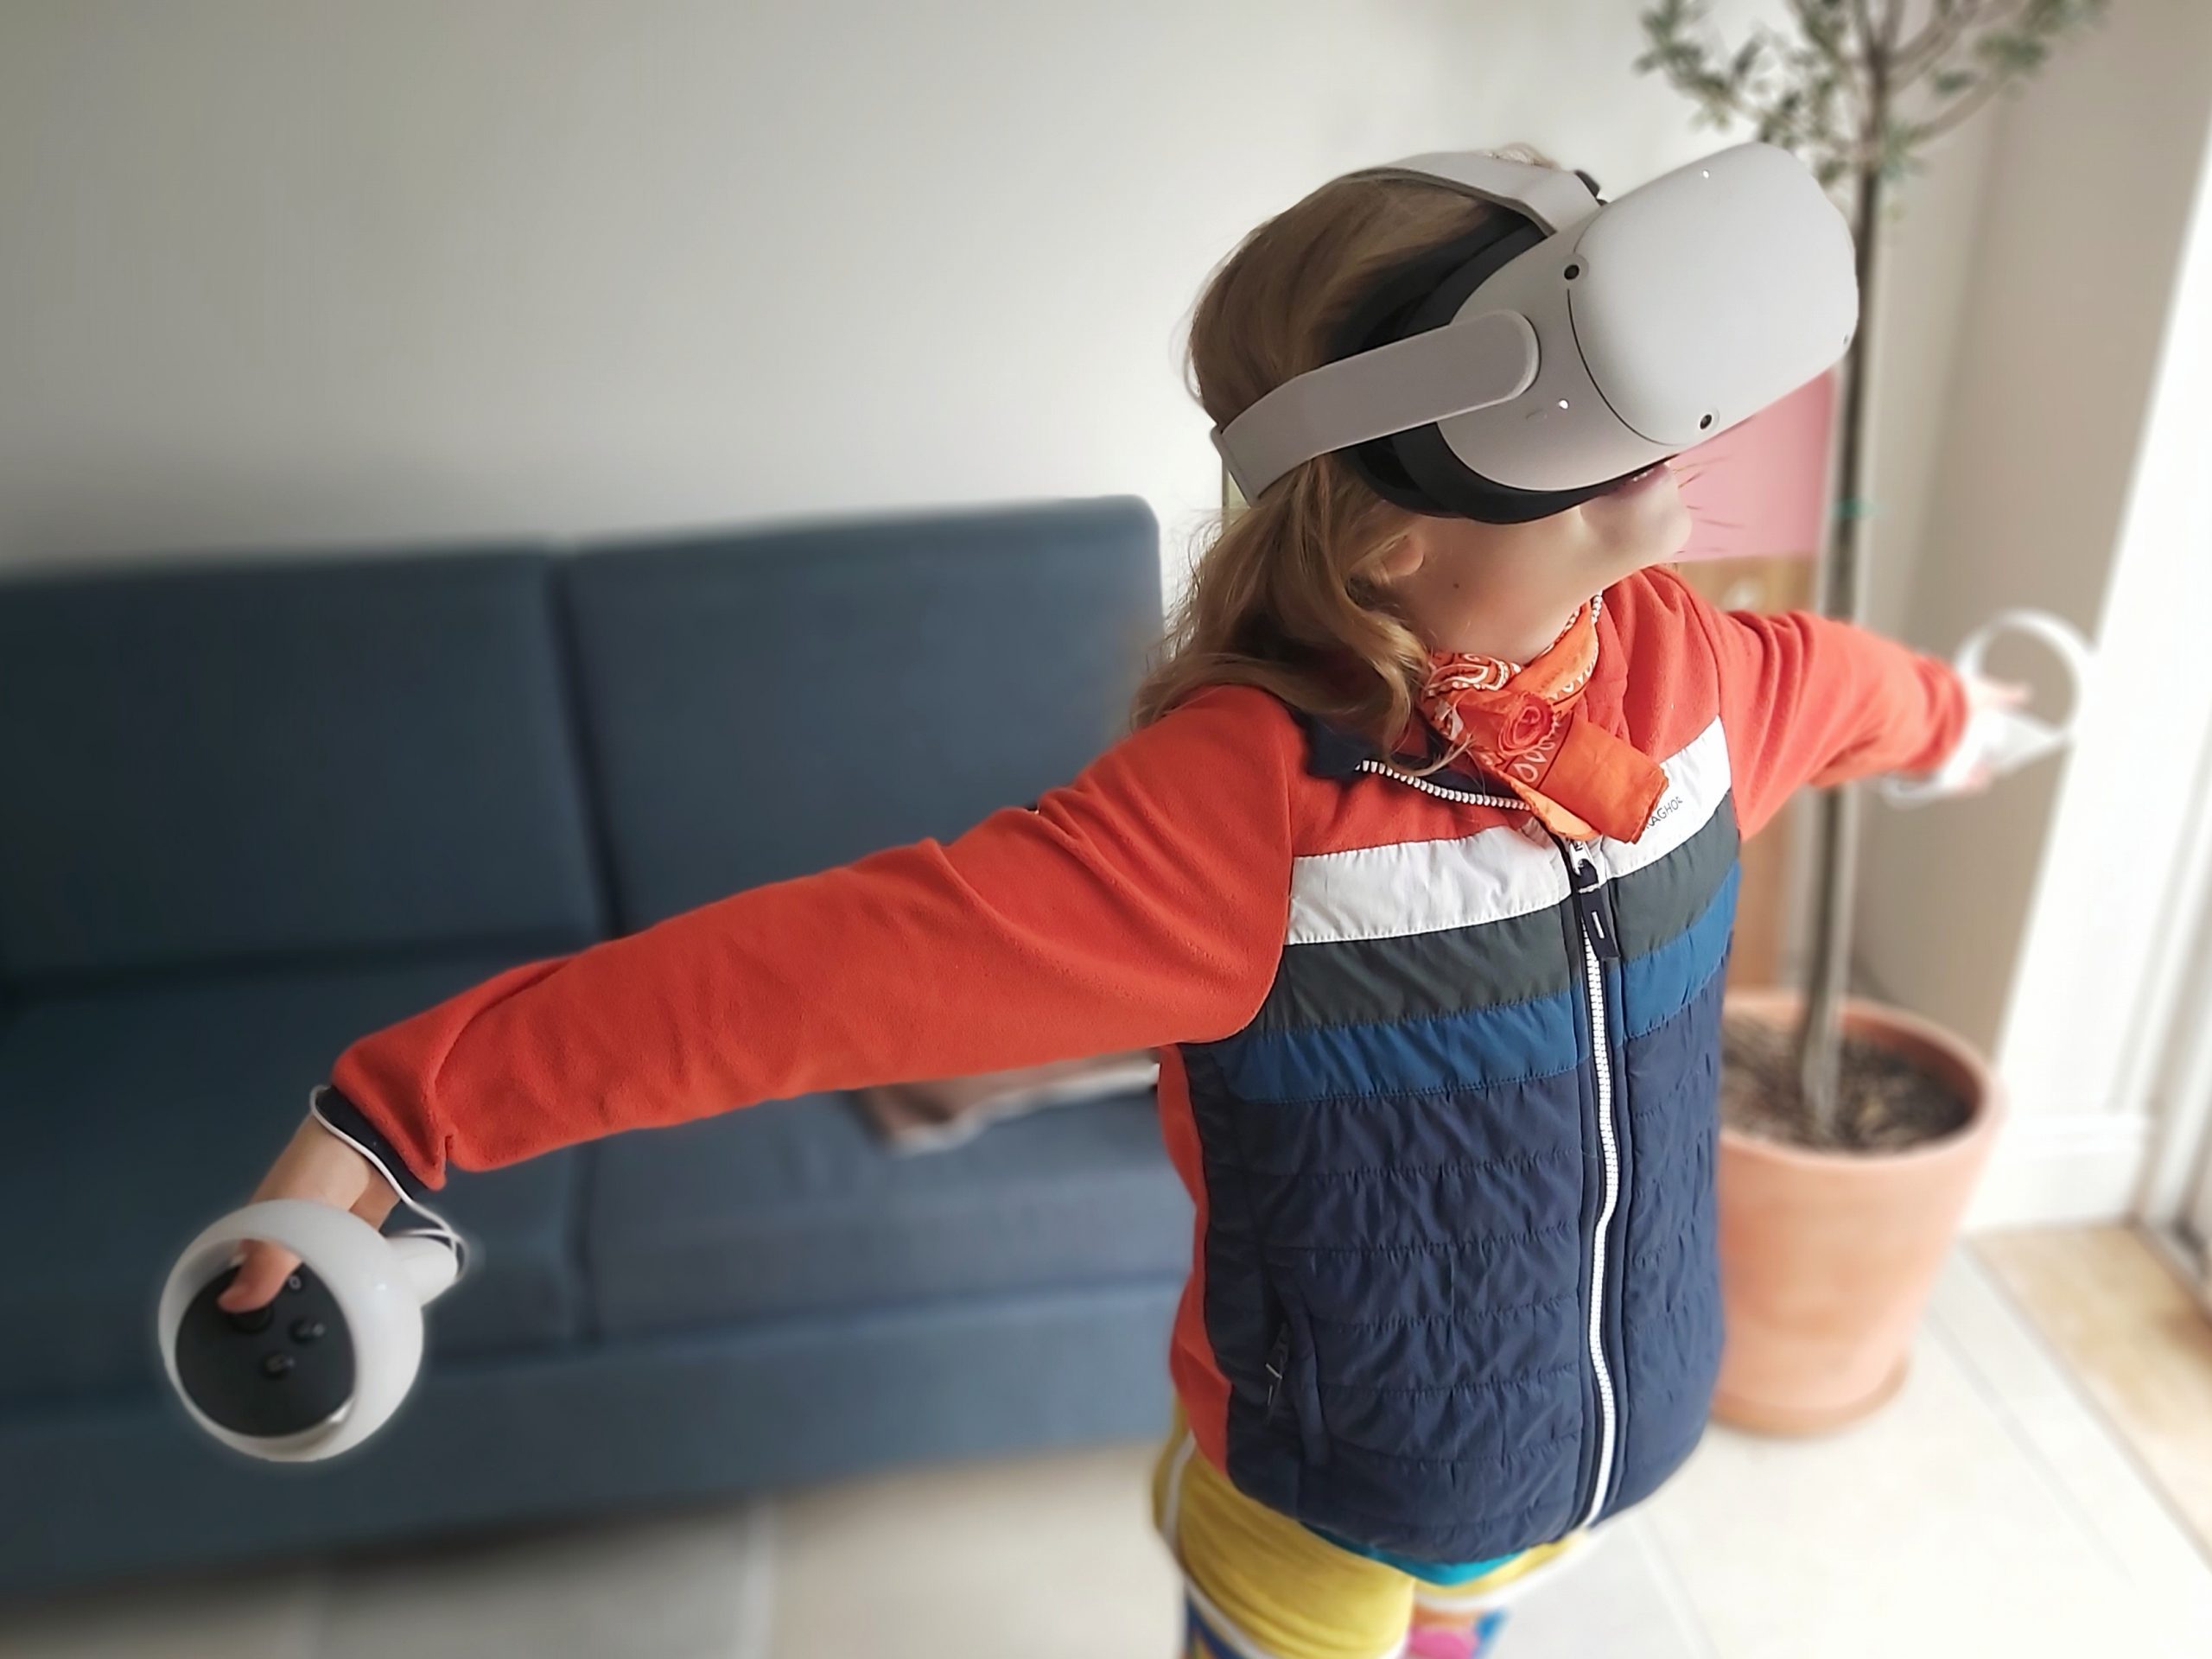 Girl in blue and orange jacket playing on the Oculus Meta Quest 2 VR Headset with arms outstretched